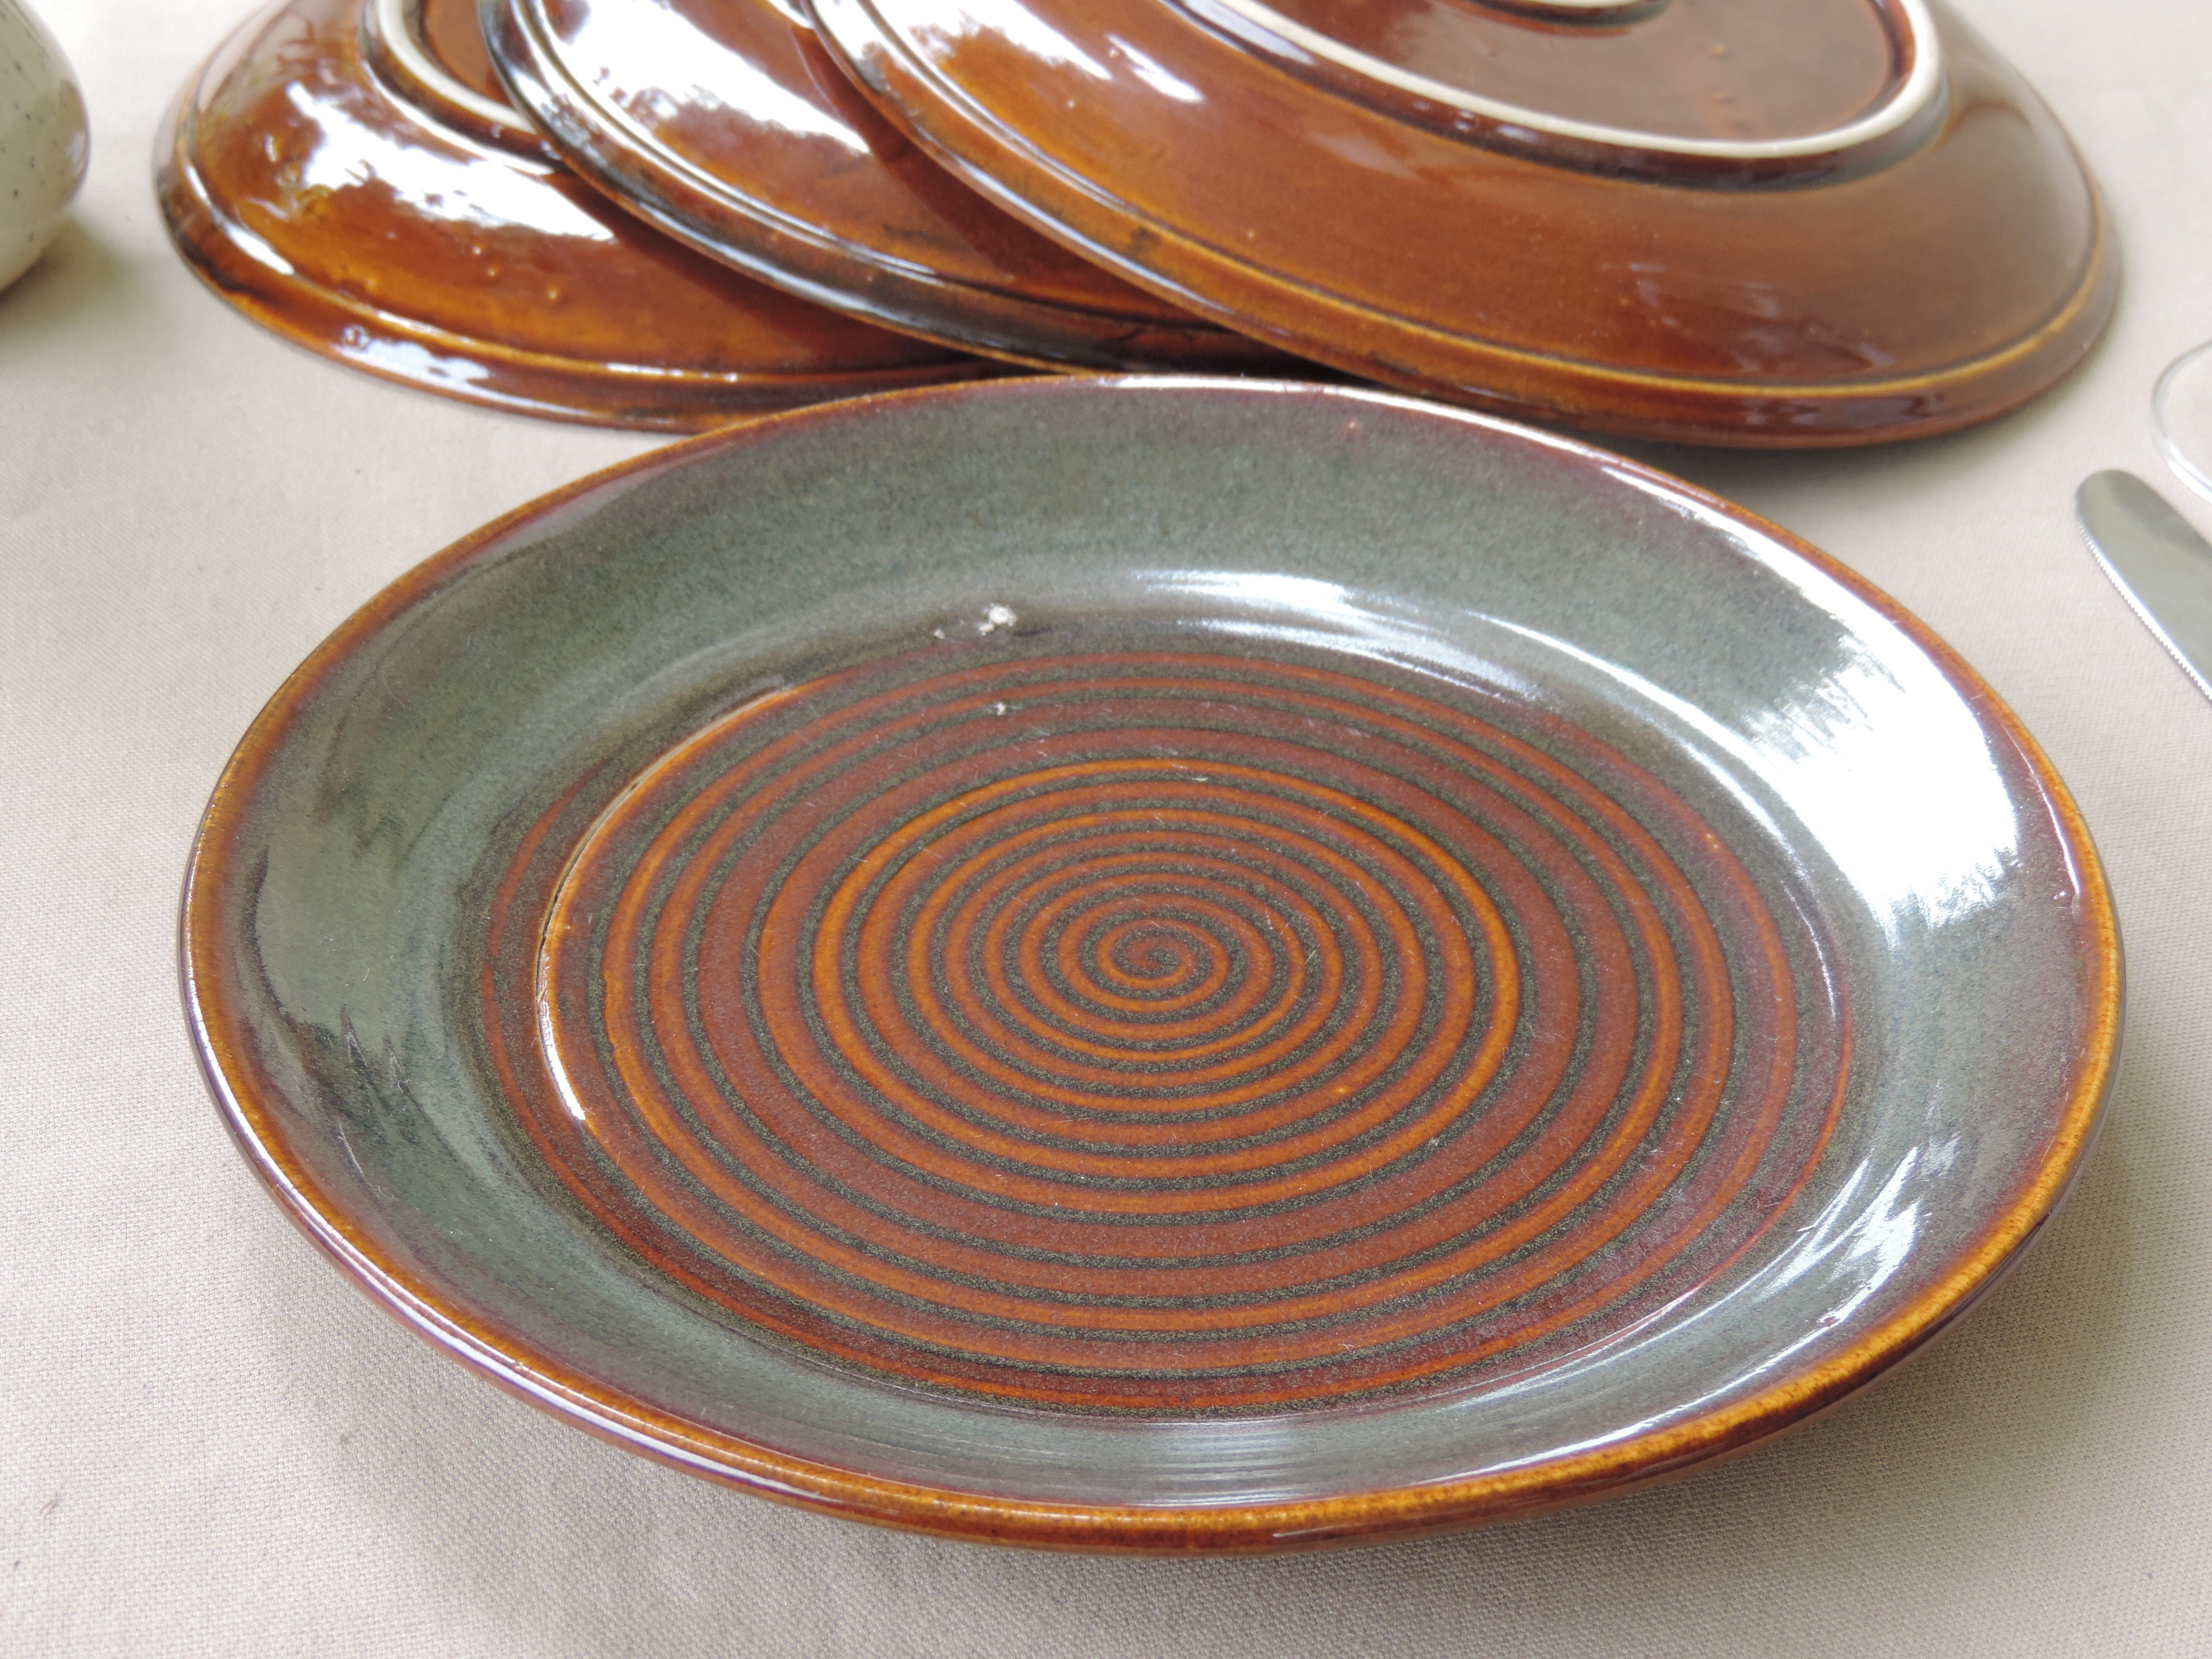 Dinnerware Collection Plates Brown Set of 4 - 10 Inches